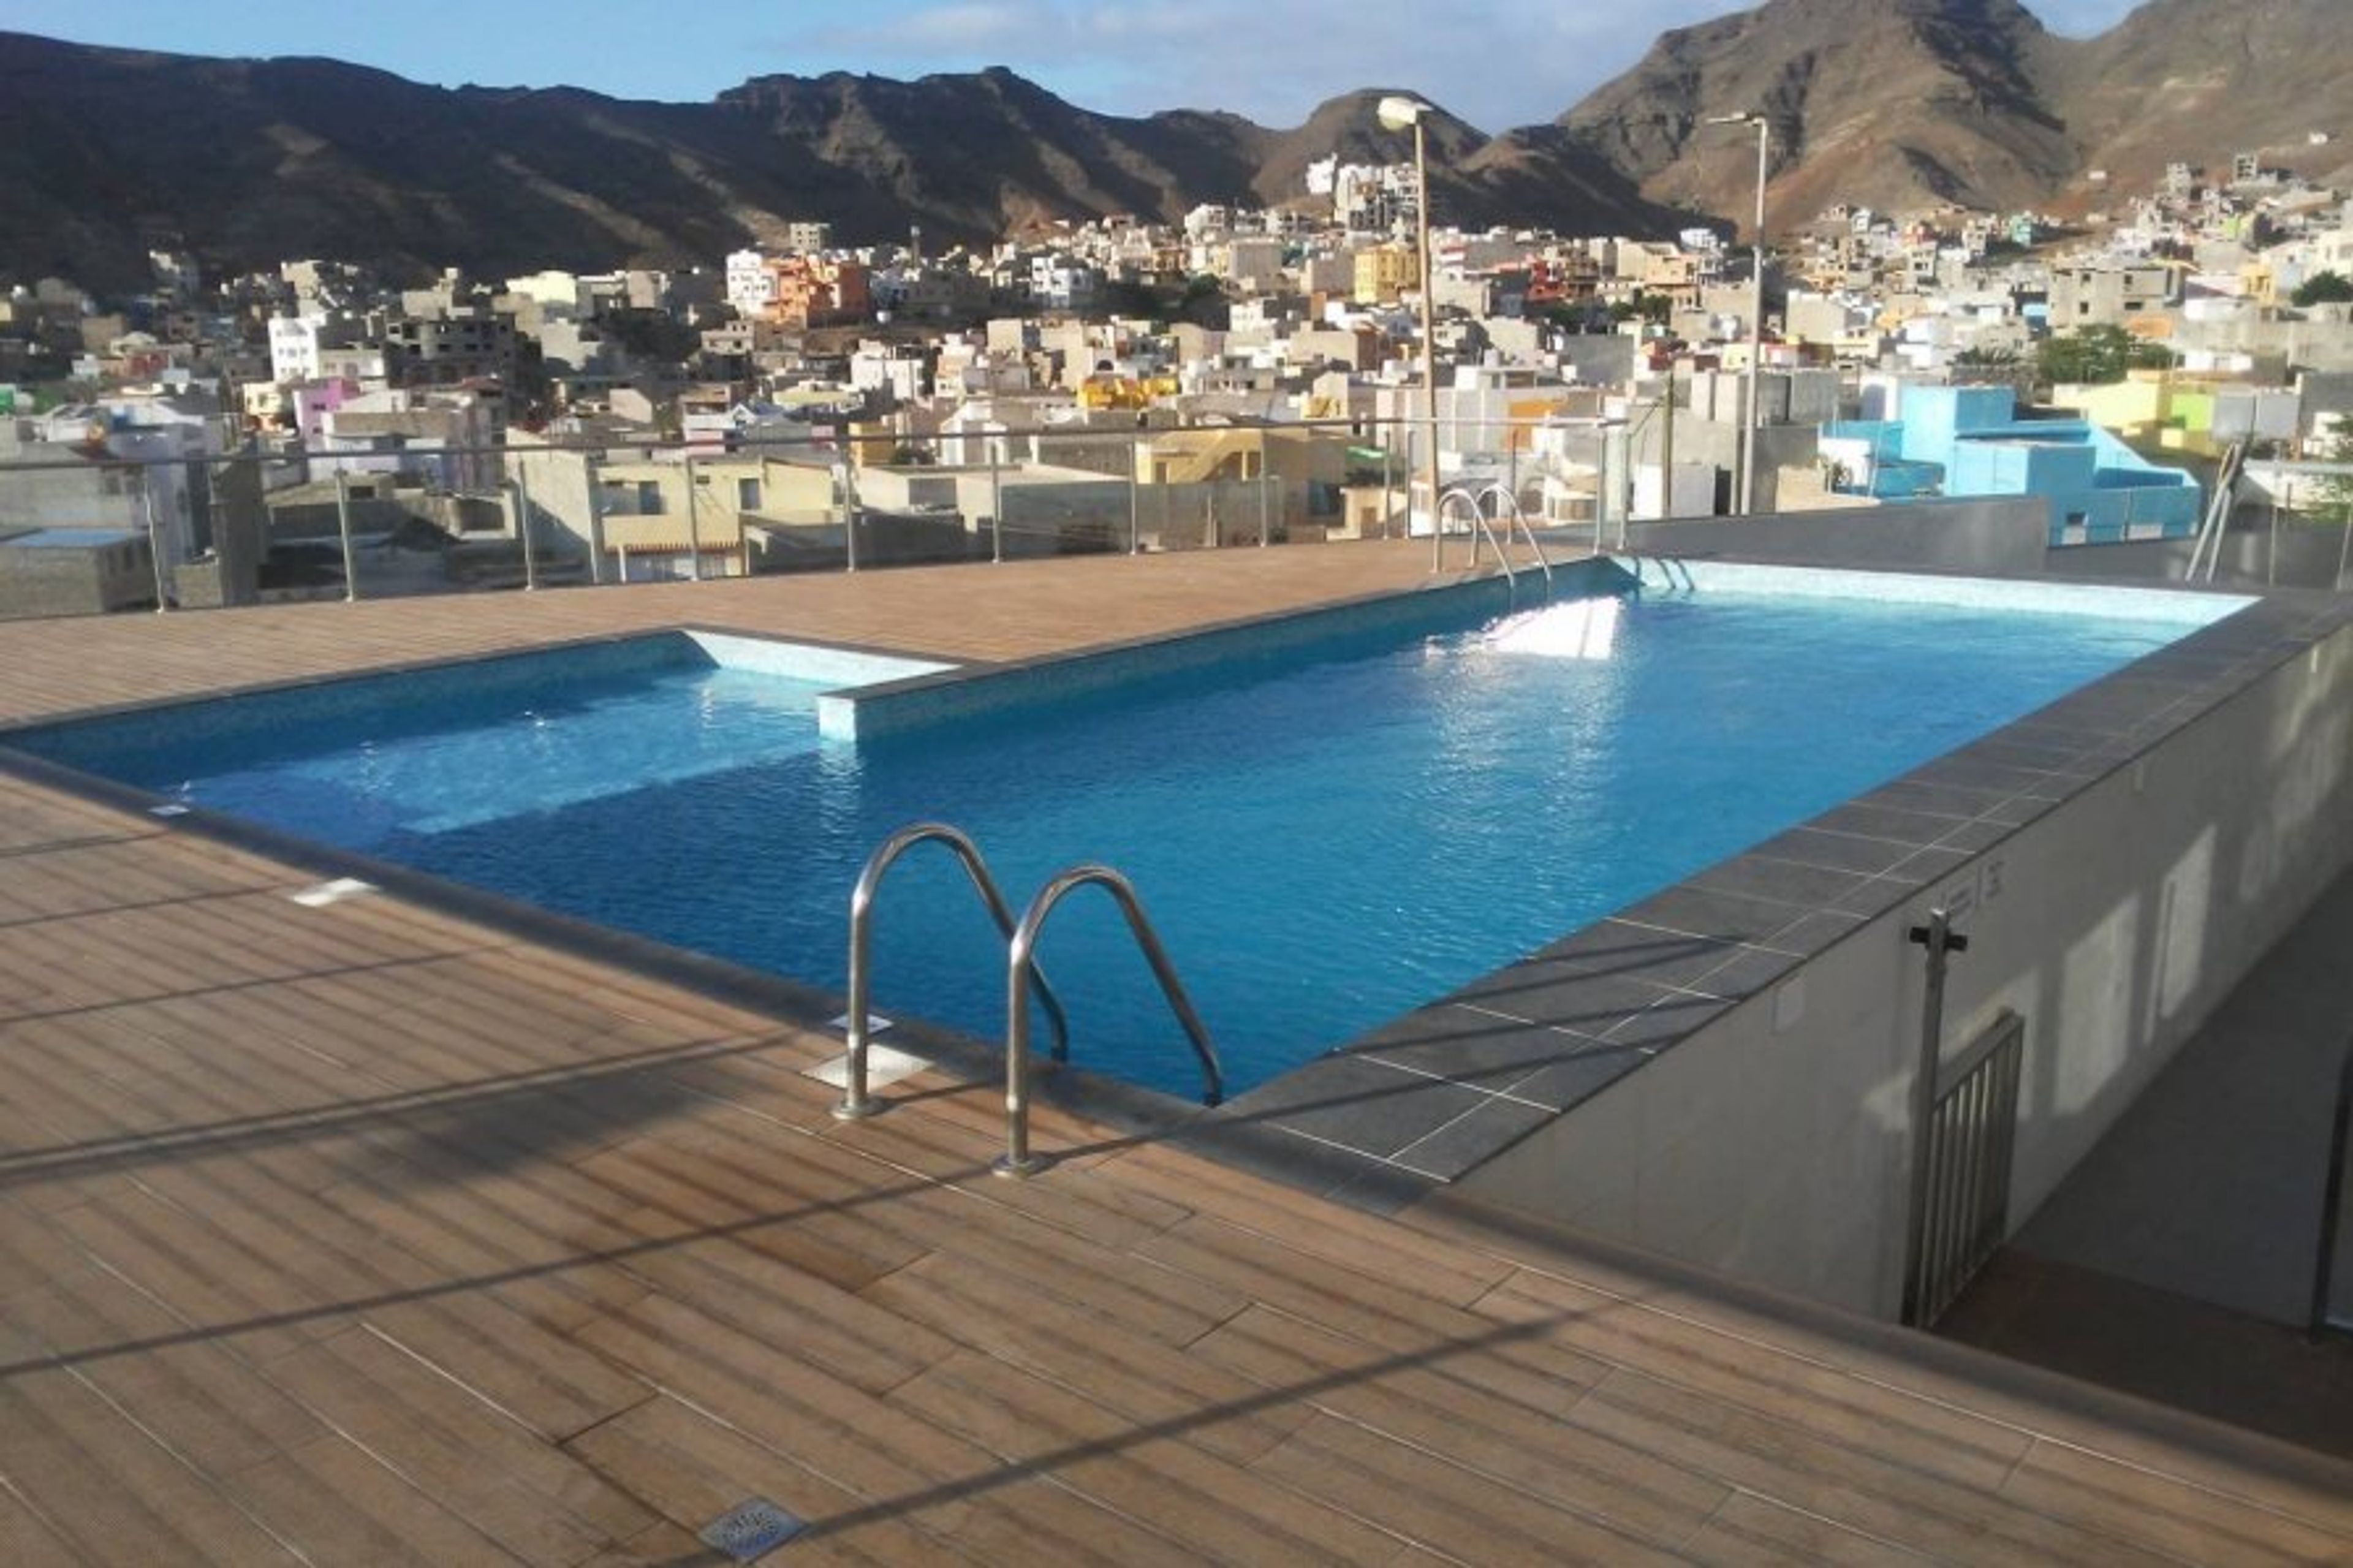 Swimming pool. We provide the towels you enjoy the sunshine